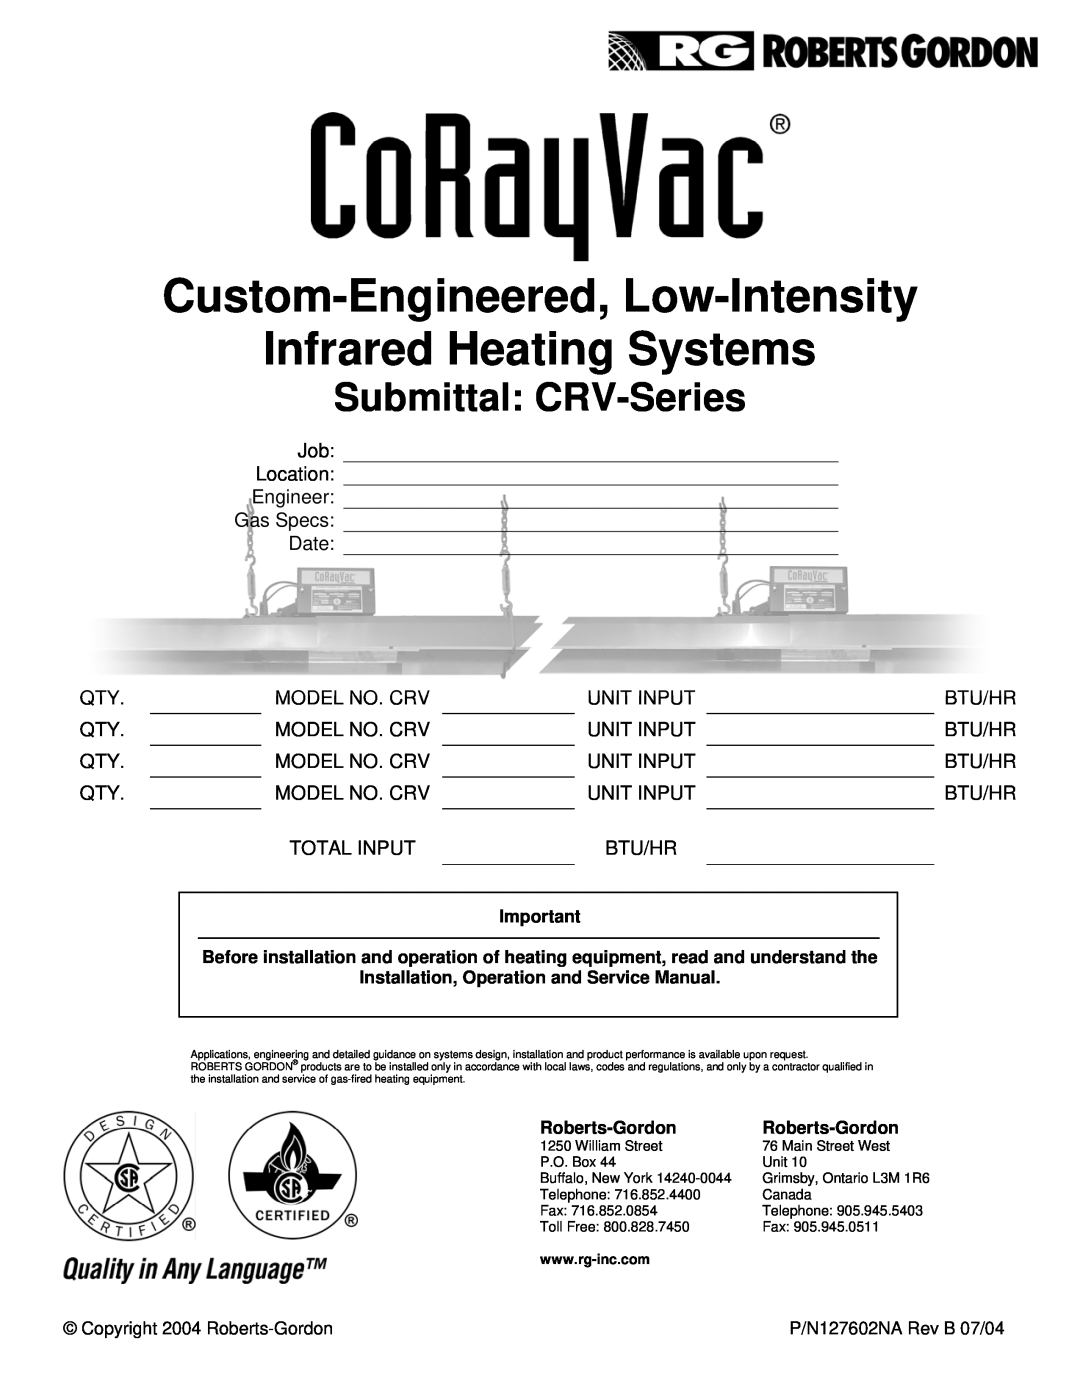 Roberts Gorden service manual Custom-Engineered, Low-Intensity, Infrared Heating Systems, Submittal CRV-Series 